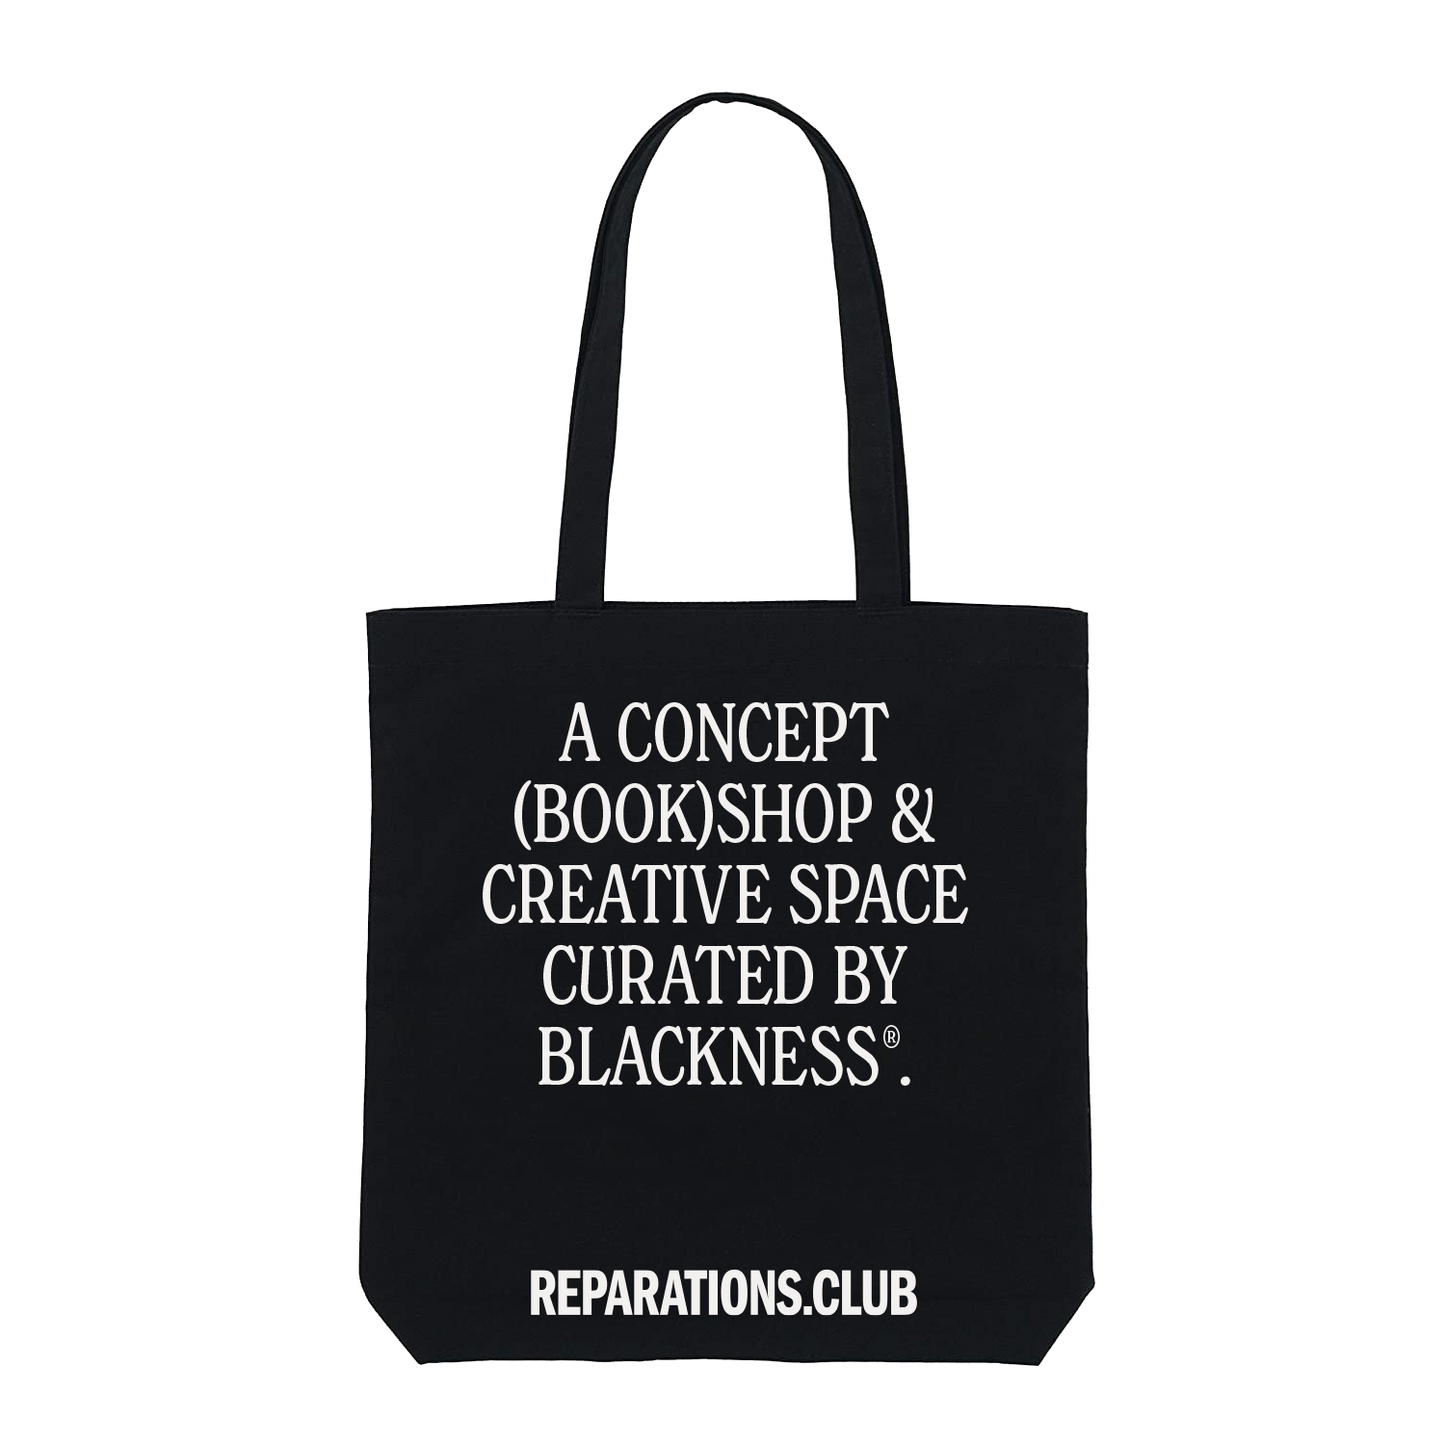 Black-Owned Tote